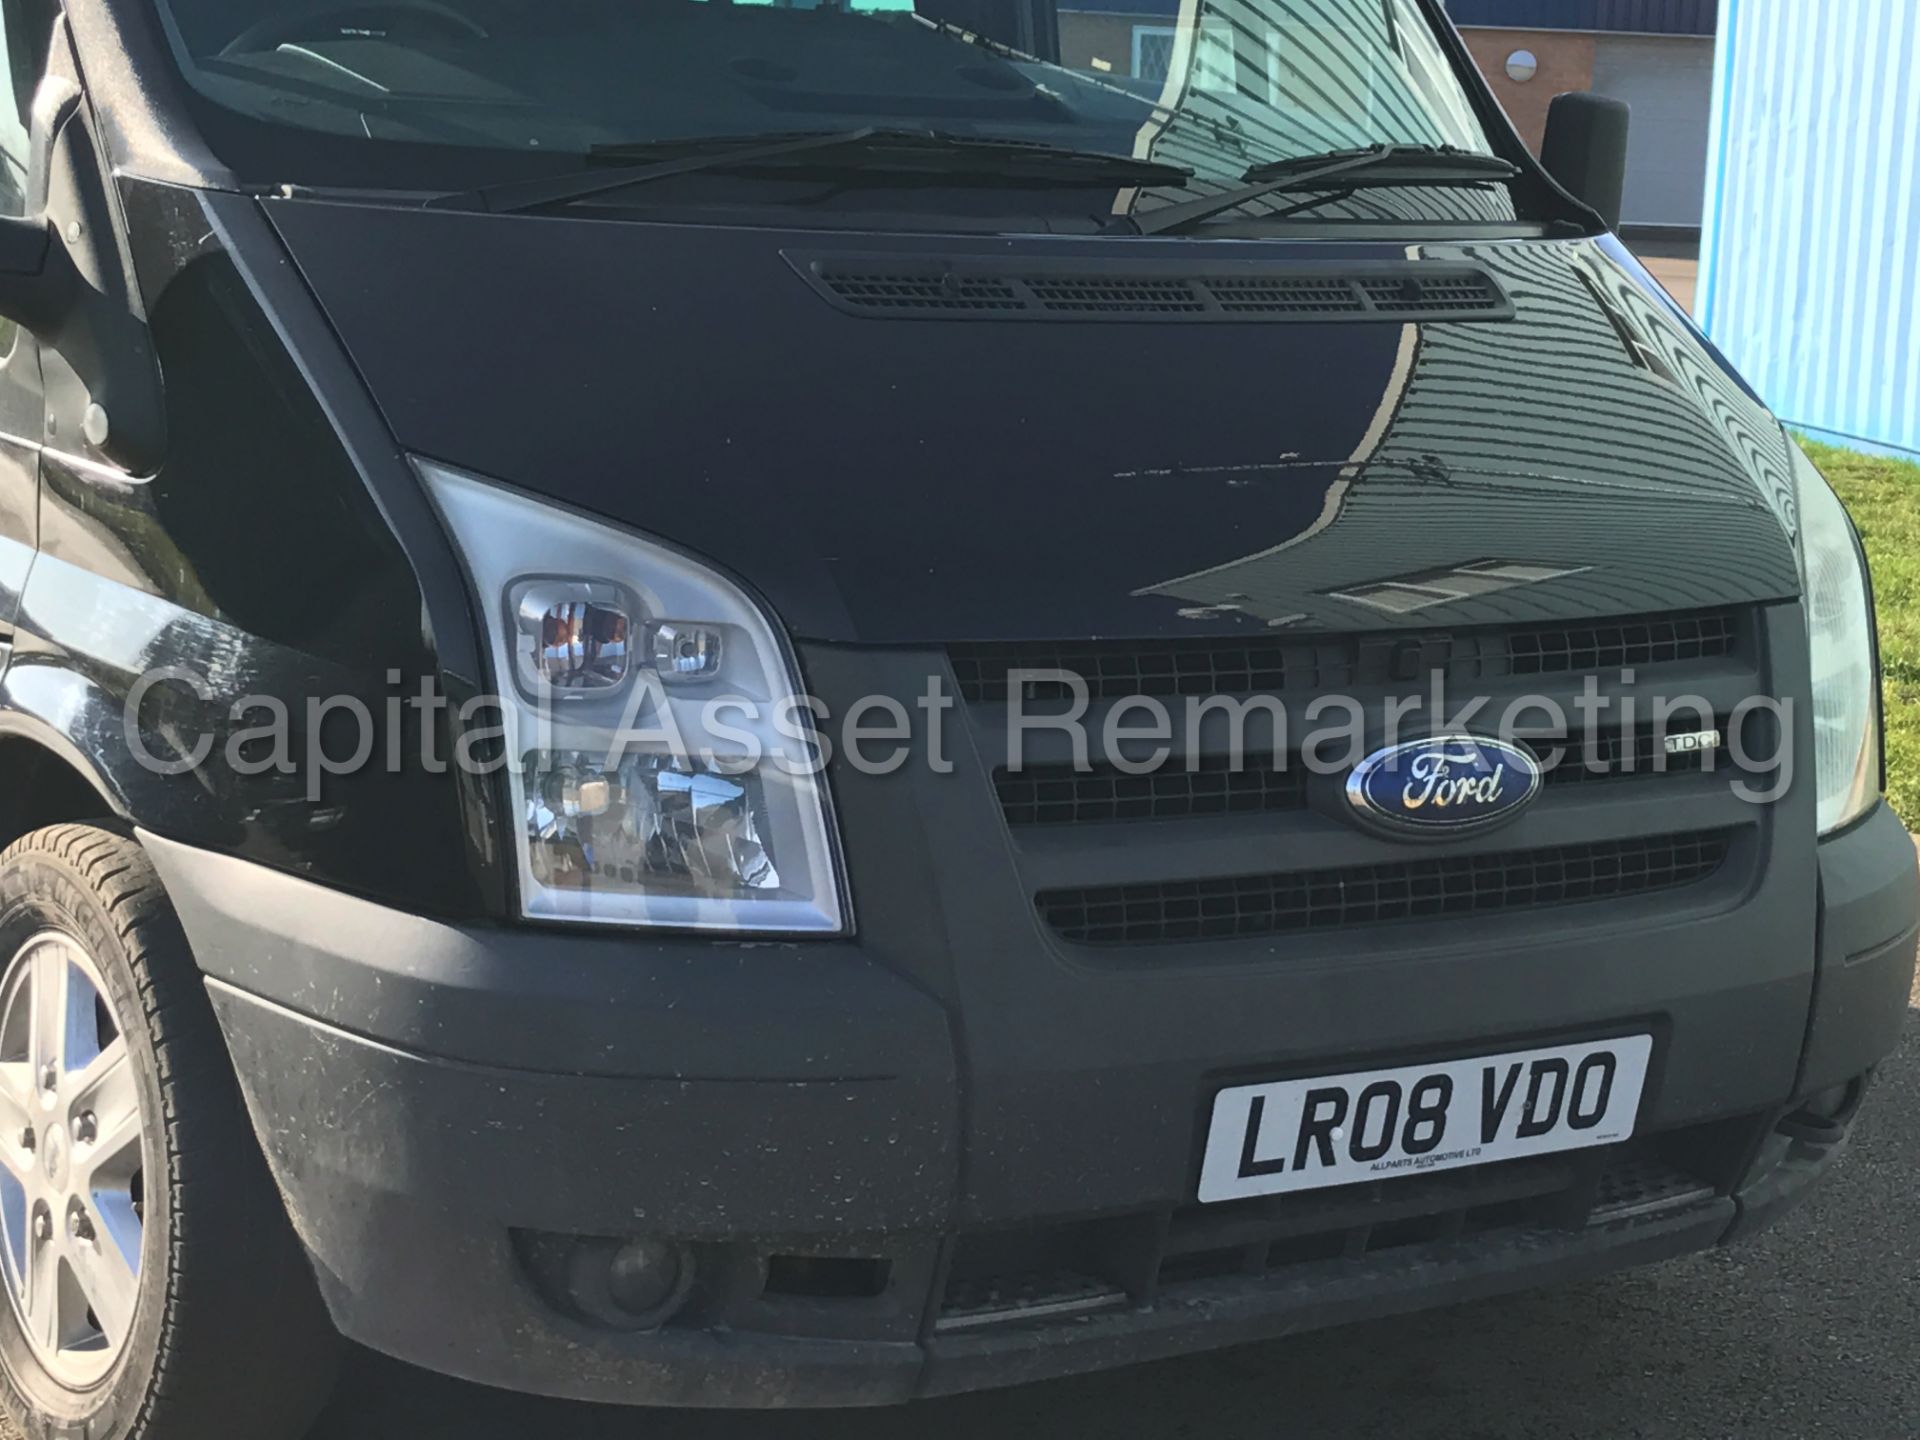 FORD TRANSIT TOURNEO 'GLX EDITION' (2008) '2.2 TDCI - 9 SEATER BUS - AIR CON ' *HUGE SPEC* (NO VAT) - Image 9 of 32